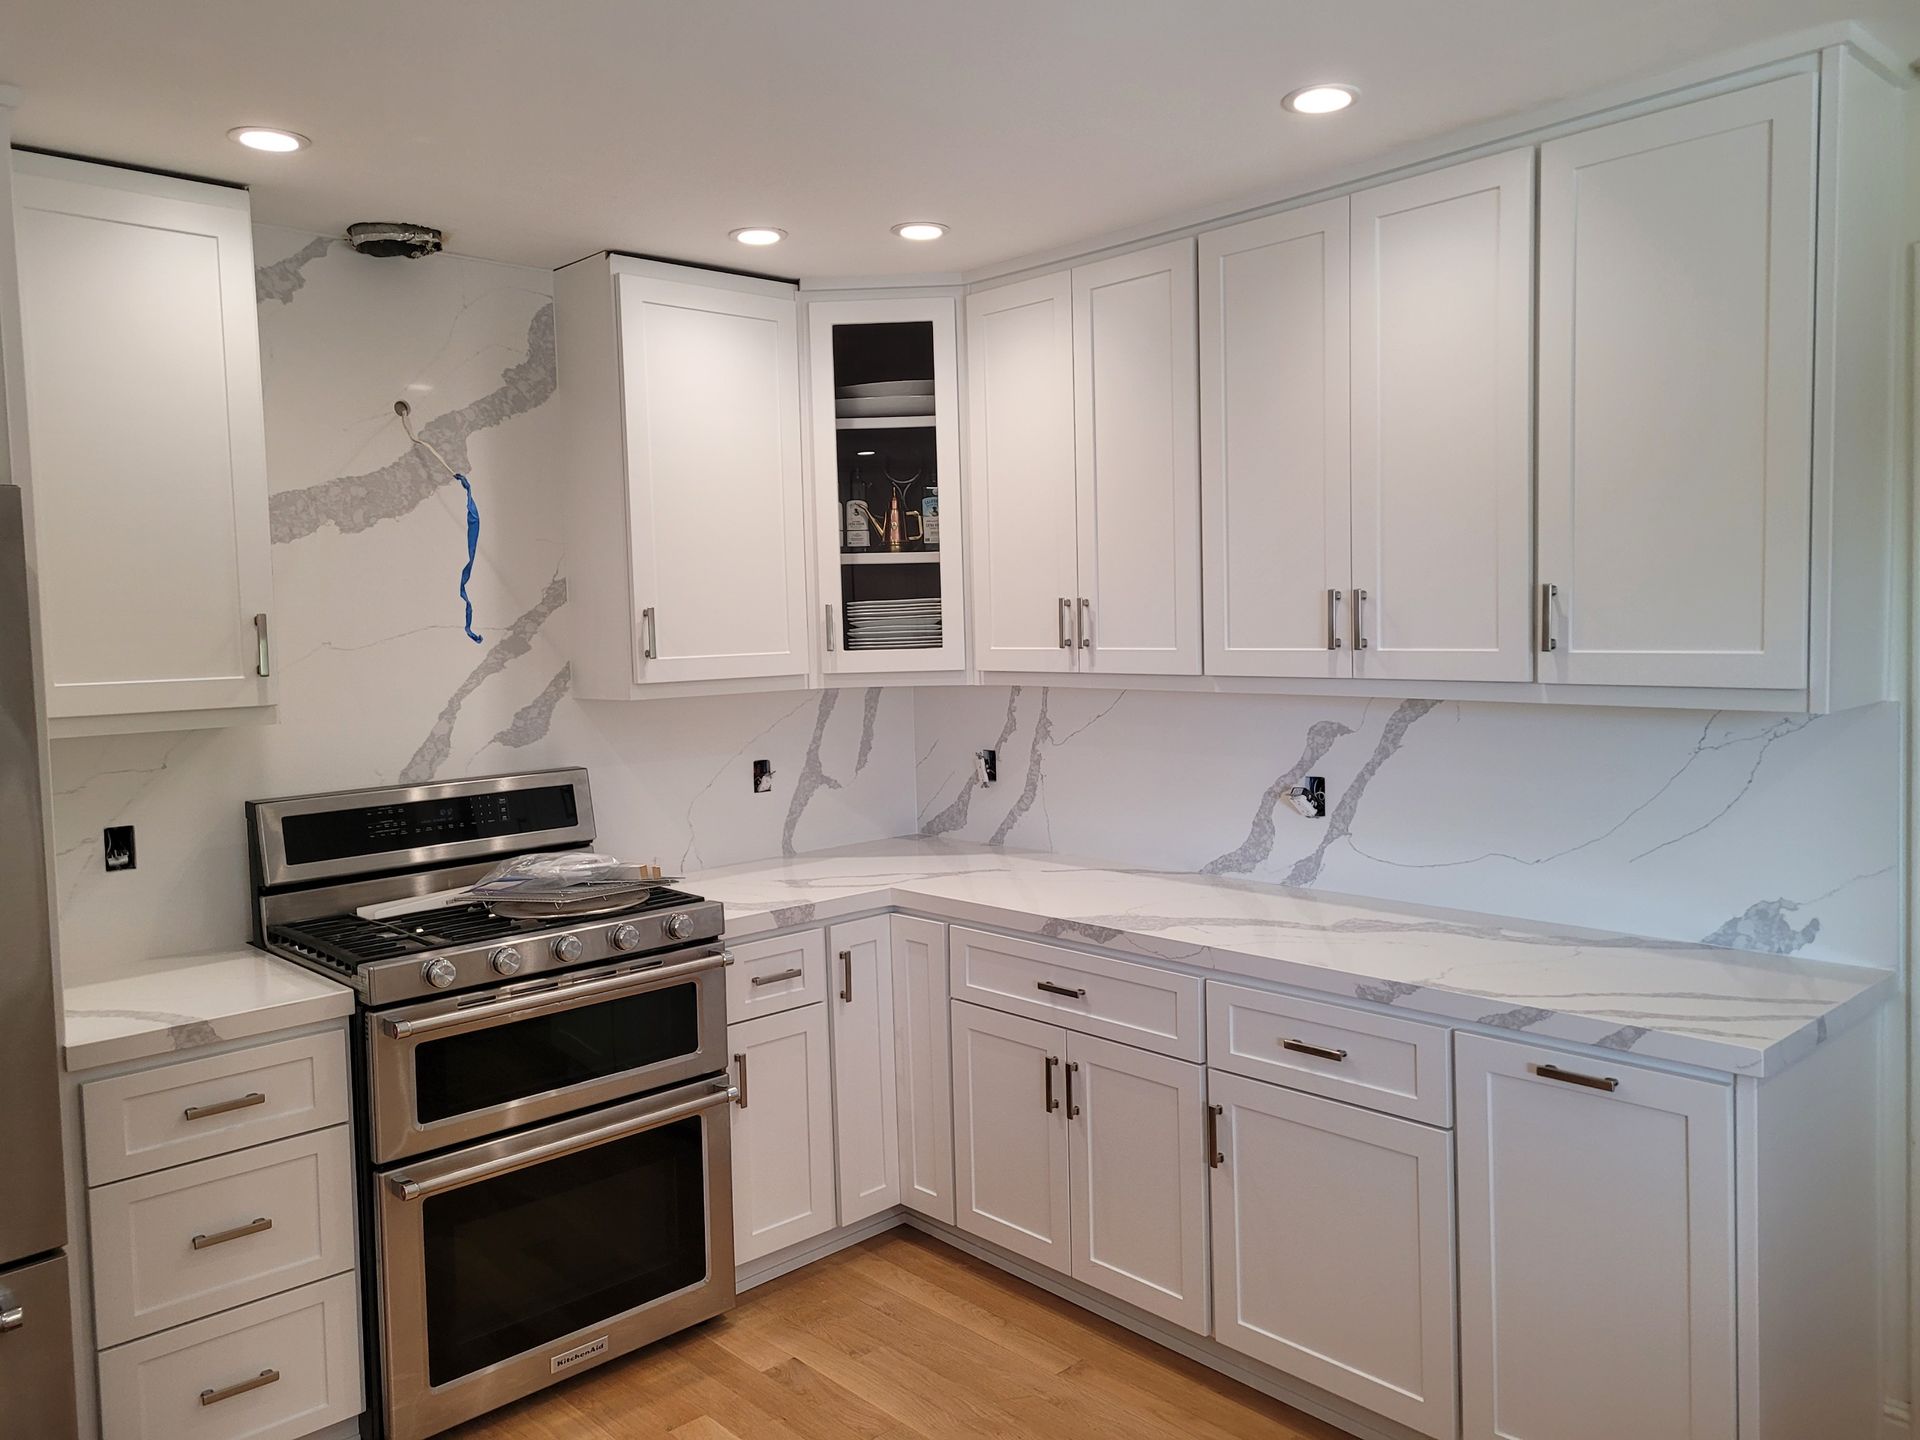 A kitchen with white cabinets , stainless steel appliances , and marble counter tops.